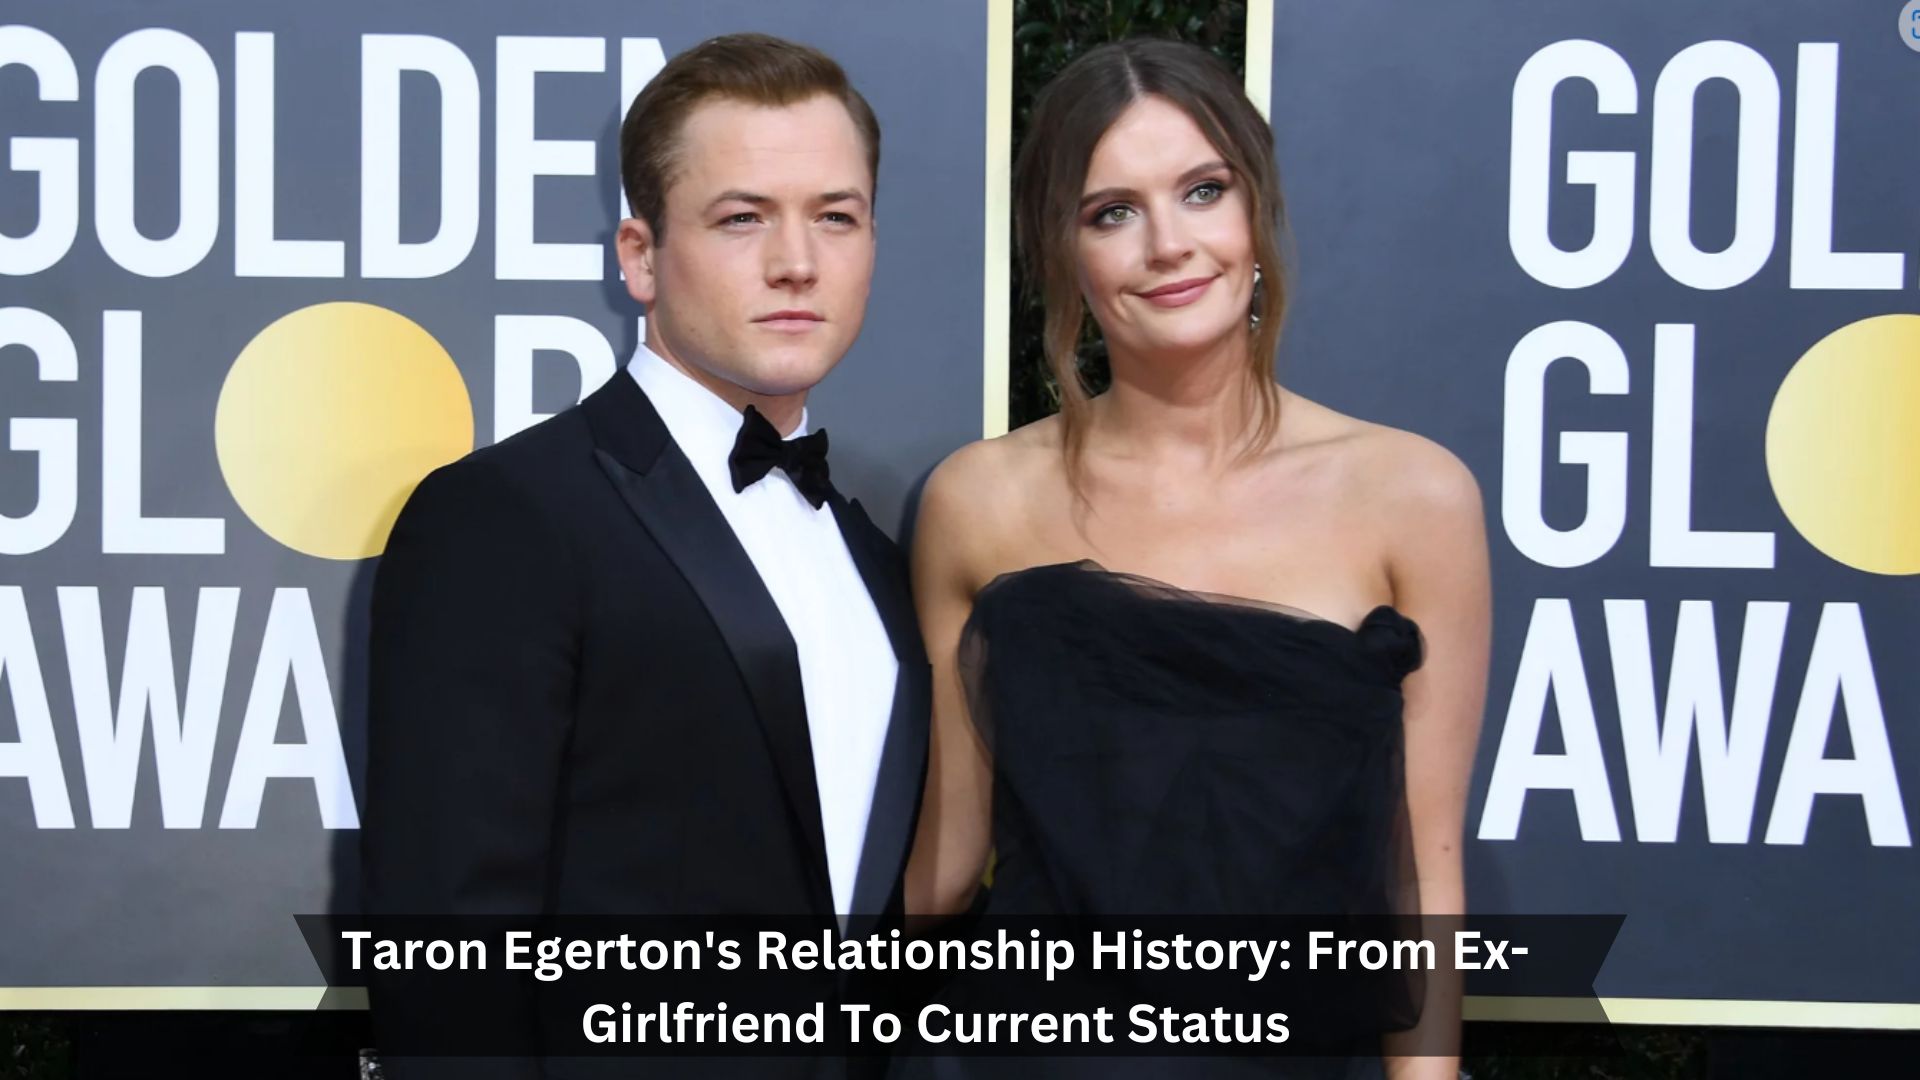 Taron-Egertons-Relationship-History-From-Ex-Girlfriend-To-Current-Status